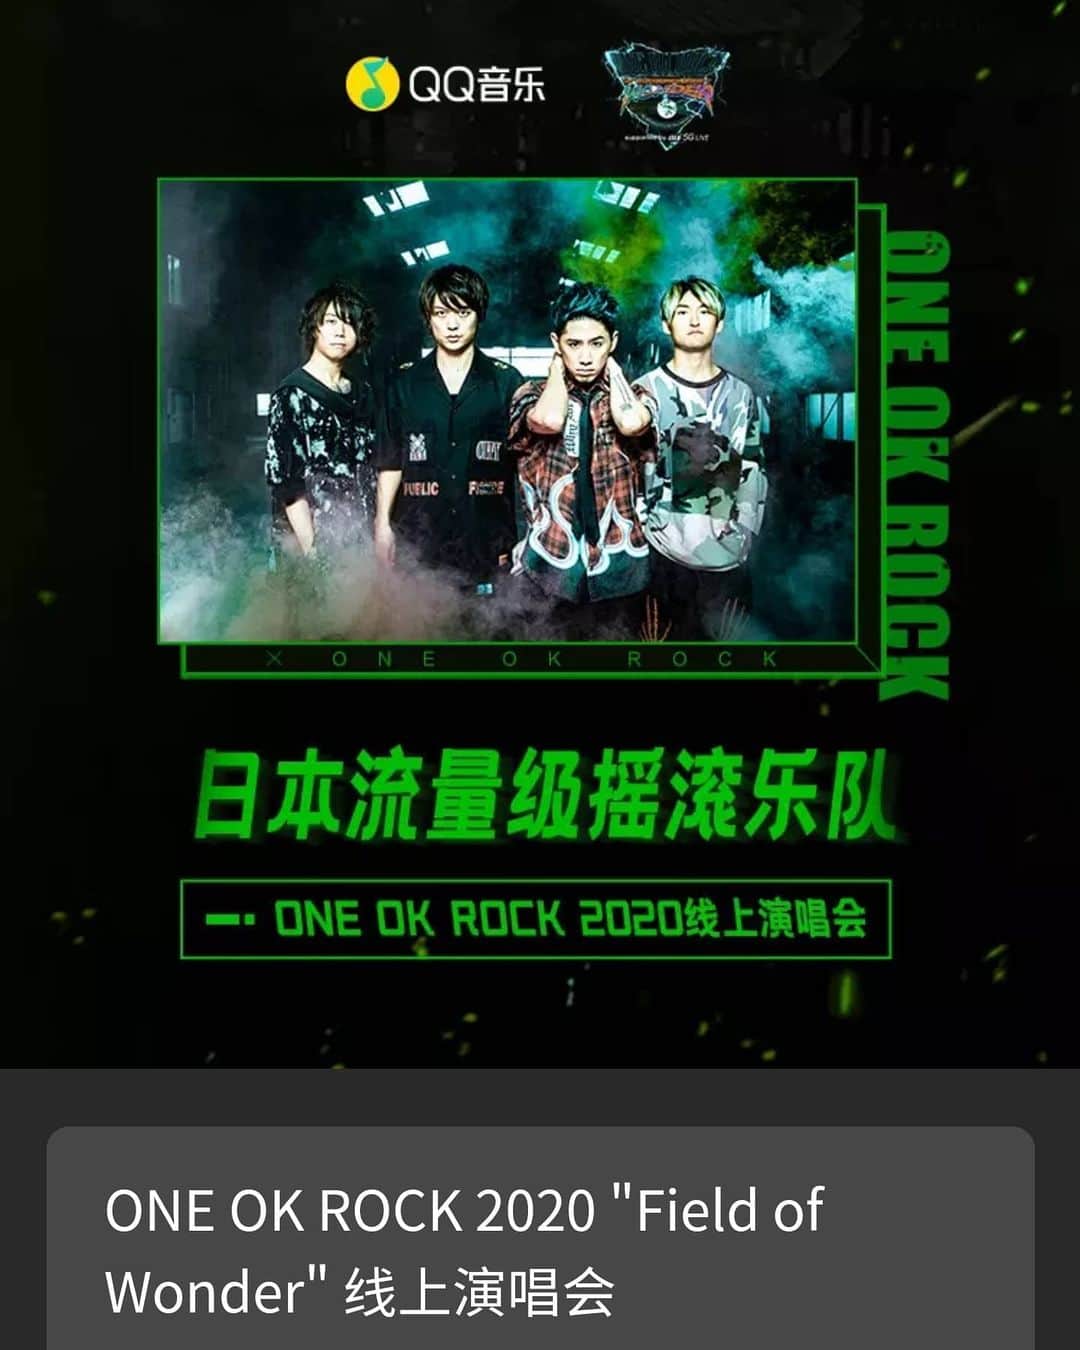 ONE OK ROCK WORLDさんのインスタグラム写真 - (ONE OK ROCK WORLDInstagram)「ONE OK ROCK 2020 "field of wonder" live streaming in China!🇨🇳 活动详情 (预约页活动详情) ONE OK ROCK这支来自日本的乐 队凭借其强大的歌曲叙事性和精彩的现场演出获得了歌迷们的喜爱，如果你想要了解这支队伍，11月7日19:00就赶紧来直播间听线上live吧! 售票时间:10月22日12:00-11月7日21:00 直播开始时间:11月7日19:00 回看时间:演唱会结束后24H仅购票用户可观看回看。 票价：280RMB 播出平台：QQ音乐  Details ONE OK ROCK,rock band from Japan,has won the love of fans with strong narativity of song and wonderful live performances.If you want to know more of this band, come to see the live show on November 7th at 19:00(Beijing time) Ticket sales time: October 22nd 12:00-November 7th 21:00 Live broadcast start time: 19:00, November 7th Rewatch time:24 hours after the live show,Only ticket purchasers can watch and review. Price :280RMB Platform:QQmusic  Link👉https://y.qq.com/m/client/tl_live_v3/dist/pre_buy.html?channelId=10054276&ADTAG=prebuy_qrcode&showId=2681755  #oneokrockofficial #10969taka #toru_10969 #tomo_10969 #ryota_0809 #fueledbyramen #eyeofthestorm #FIELDOFWONDER #china」10月23日 9時21分 - oneokrockworld